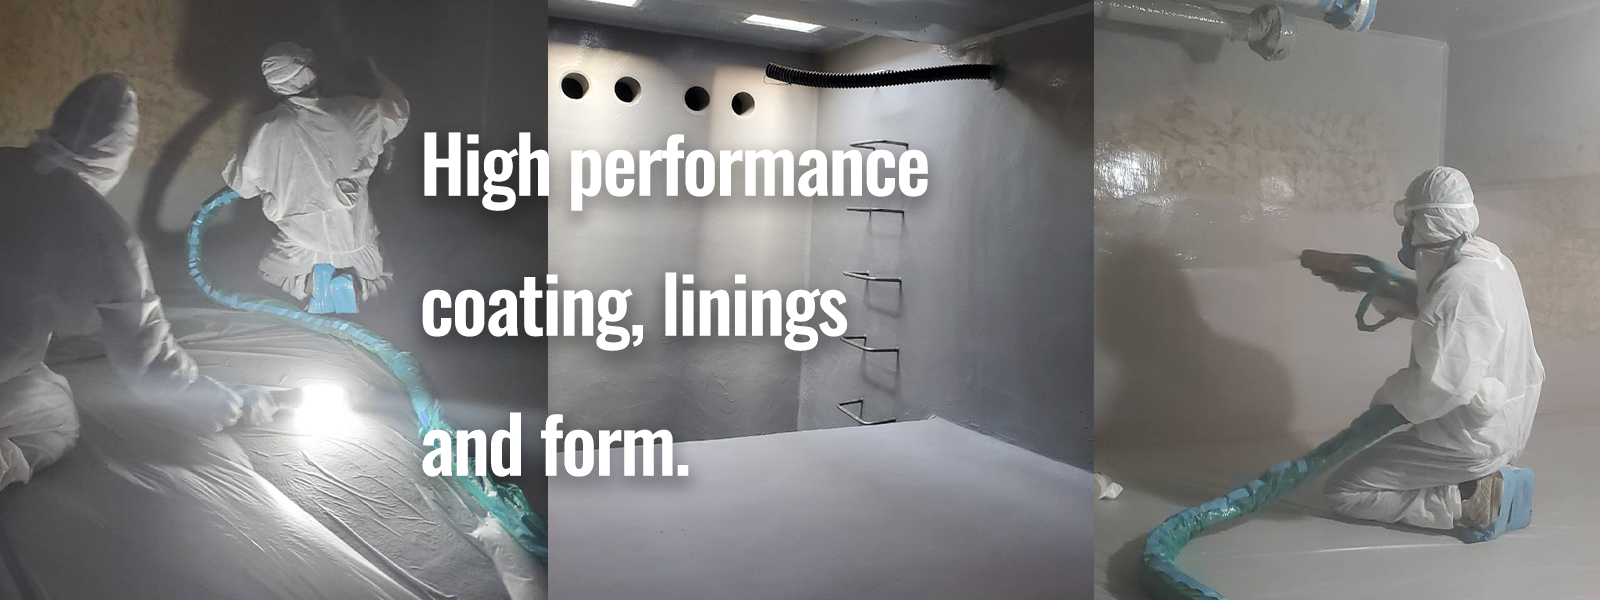 High performance coating, linings and form.